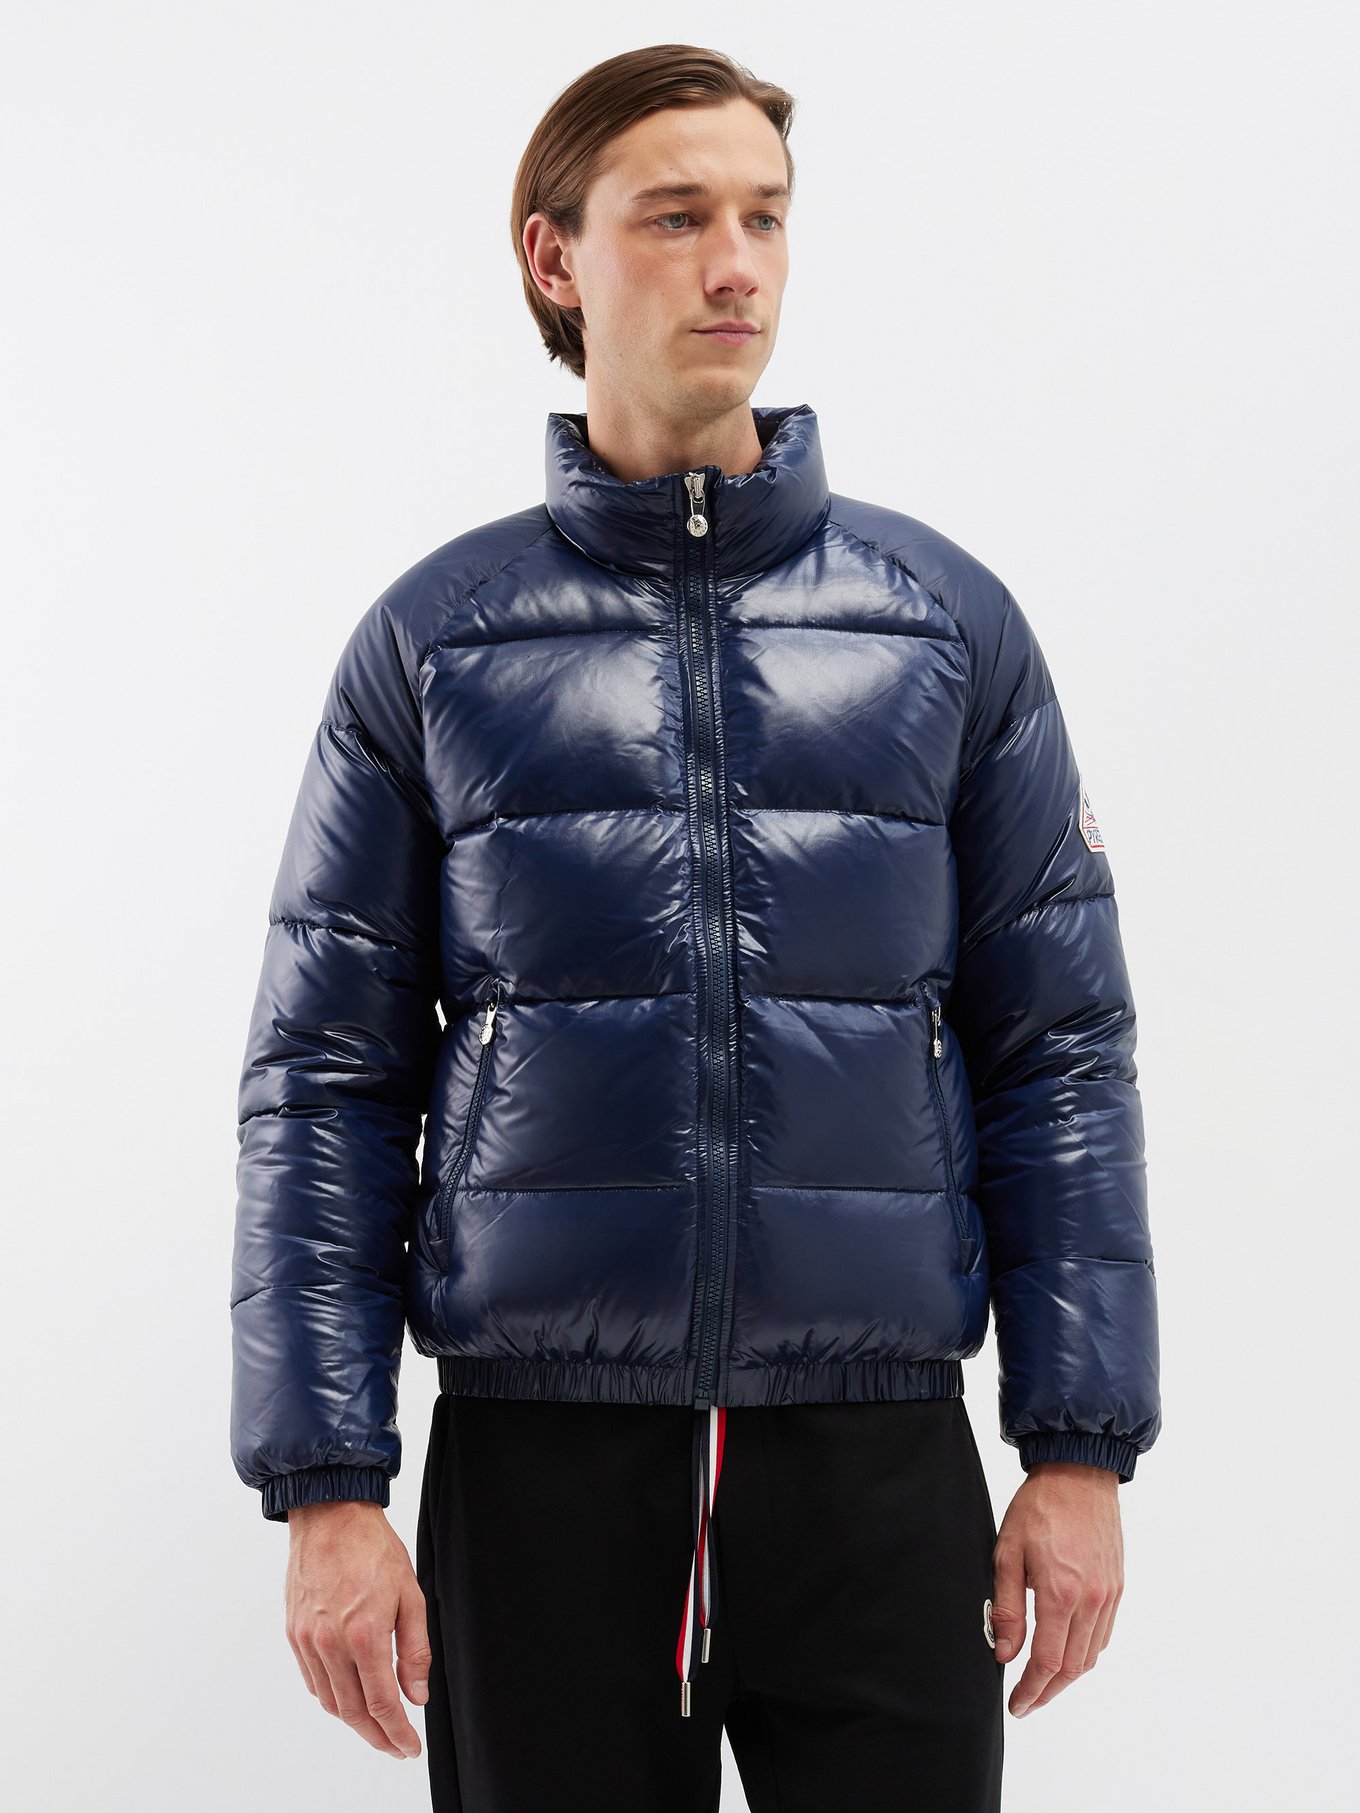 Vintage Mythic 2 quilted down jacket | Pyrenex